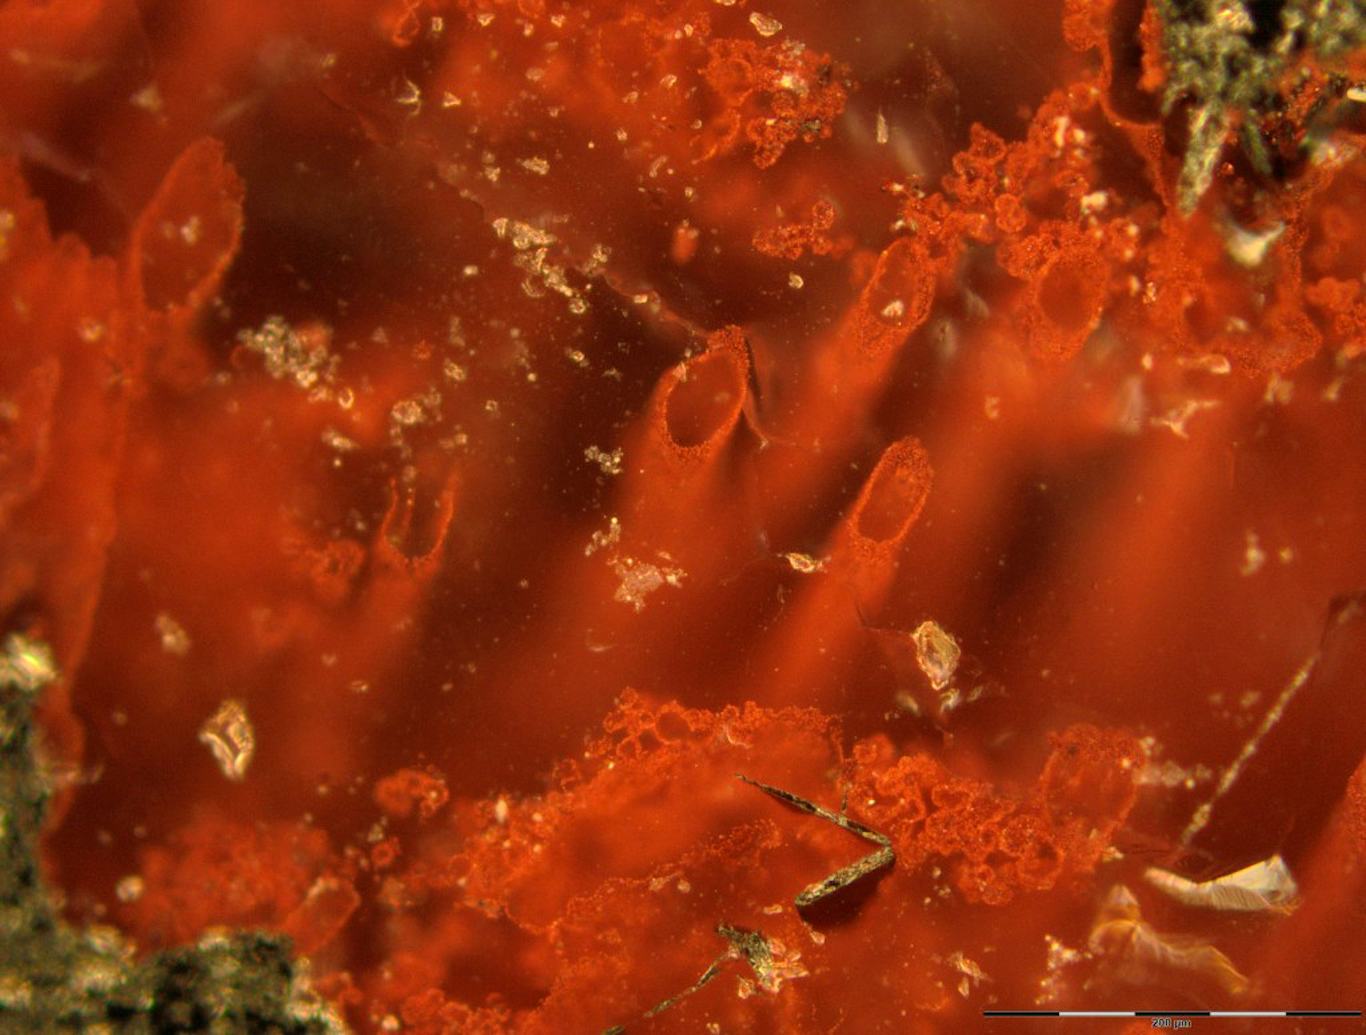 Newsela - Traces of ancient life found in fossils could date back   billion years